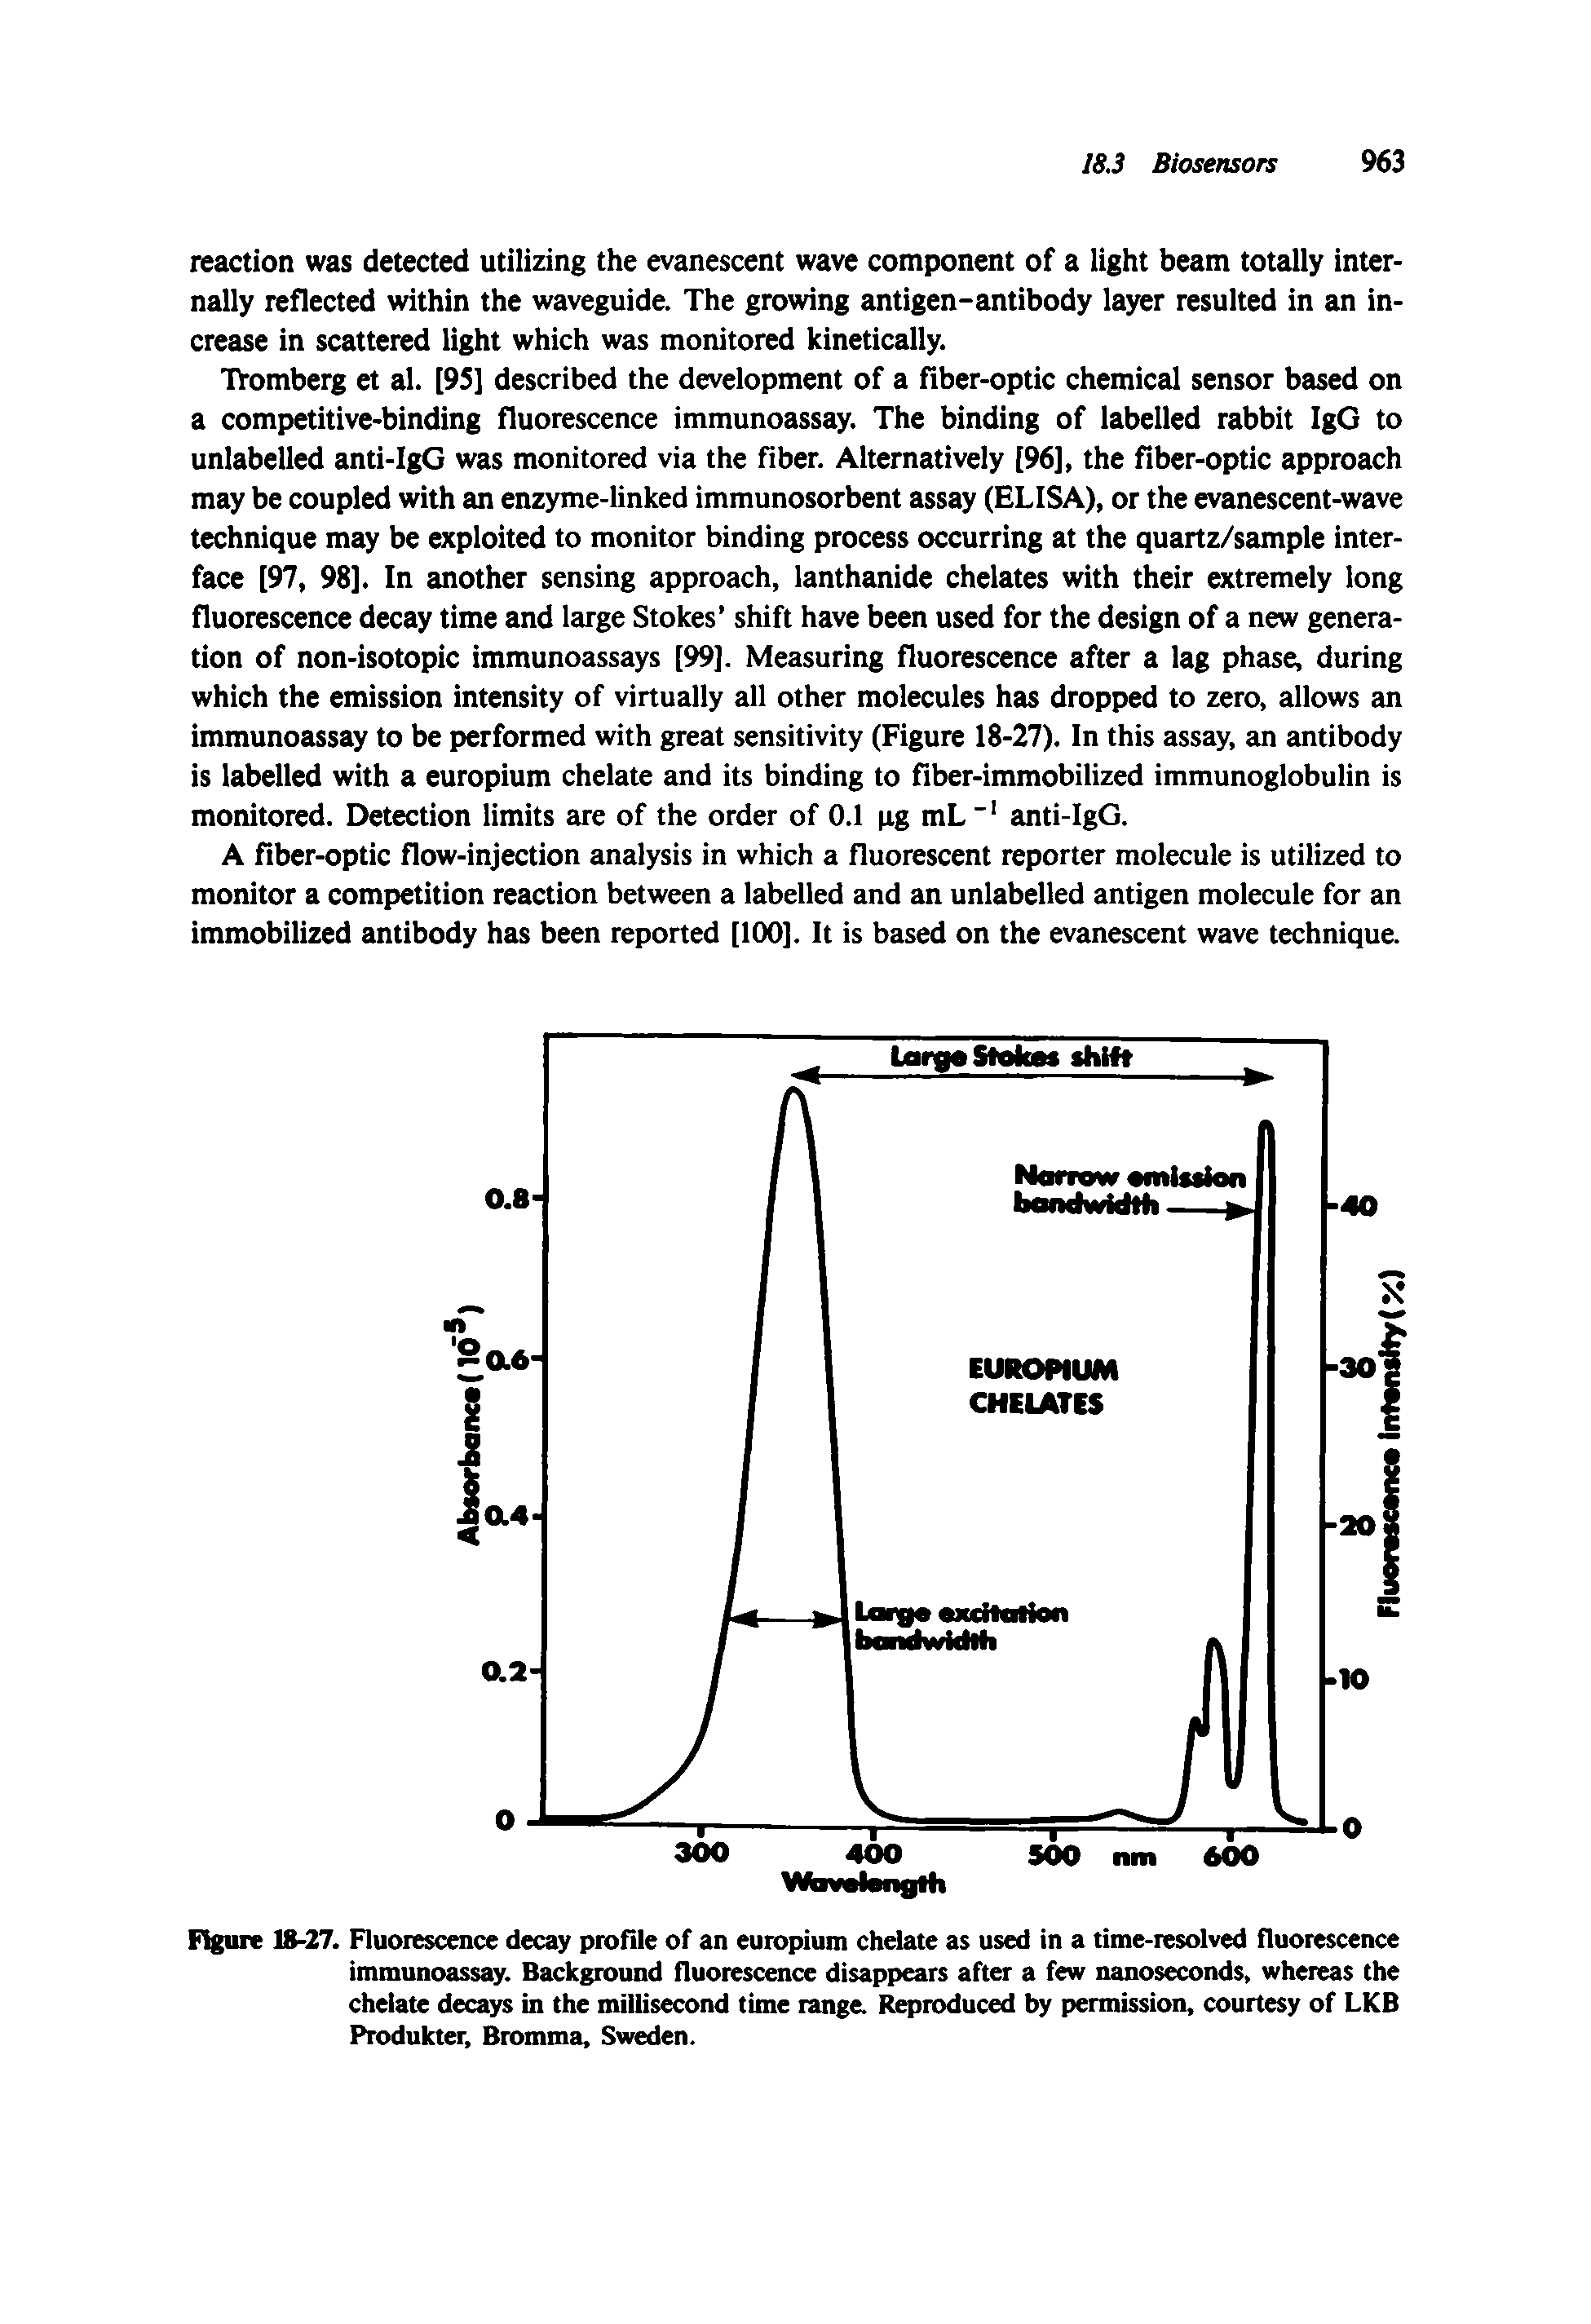 Figure 18-27. Fluorescence decay profile of an europium chelate as used in a time-resolved fluorescence immunoassay. Background fluorescence disappears after a few nanoseconds, whereas the chelate decays in the millisecond time range. Reproduced by permission, courtesy of LKB Produkter, Bromma, Sweden.